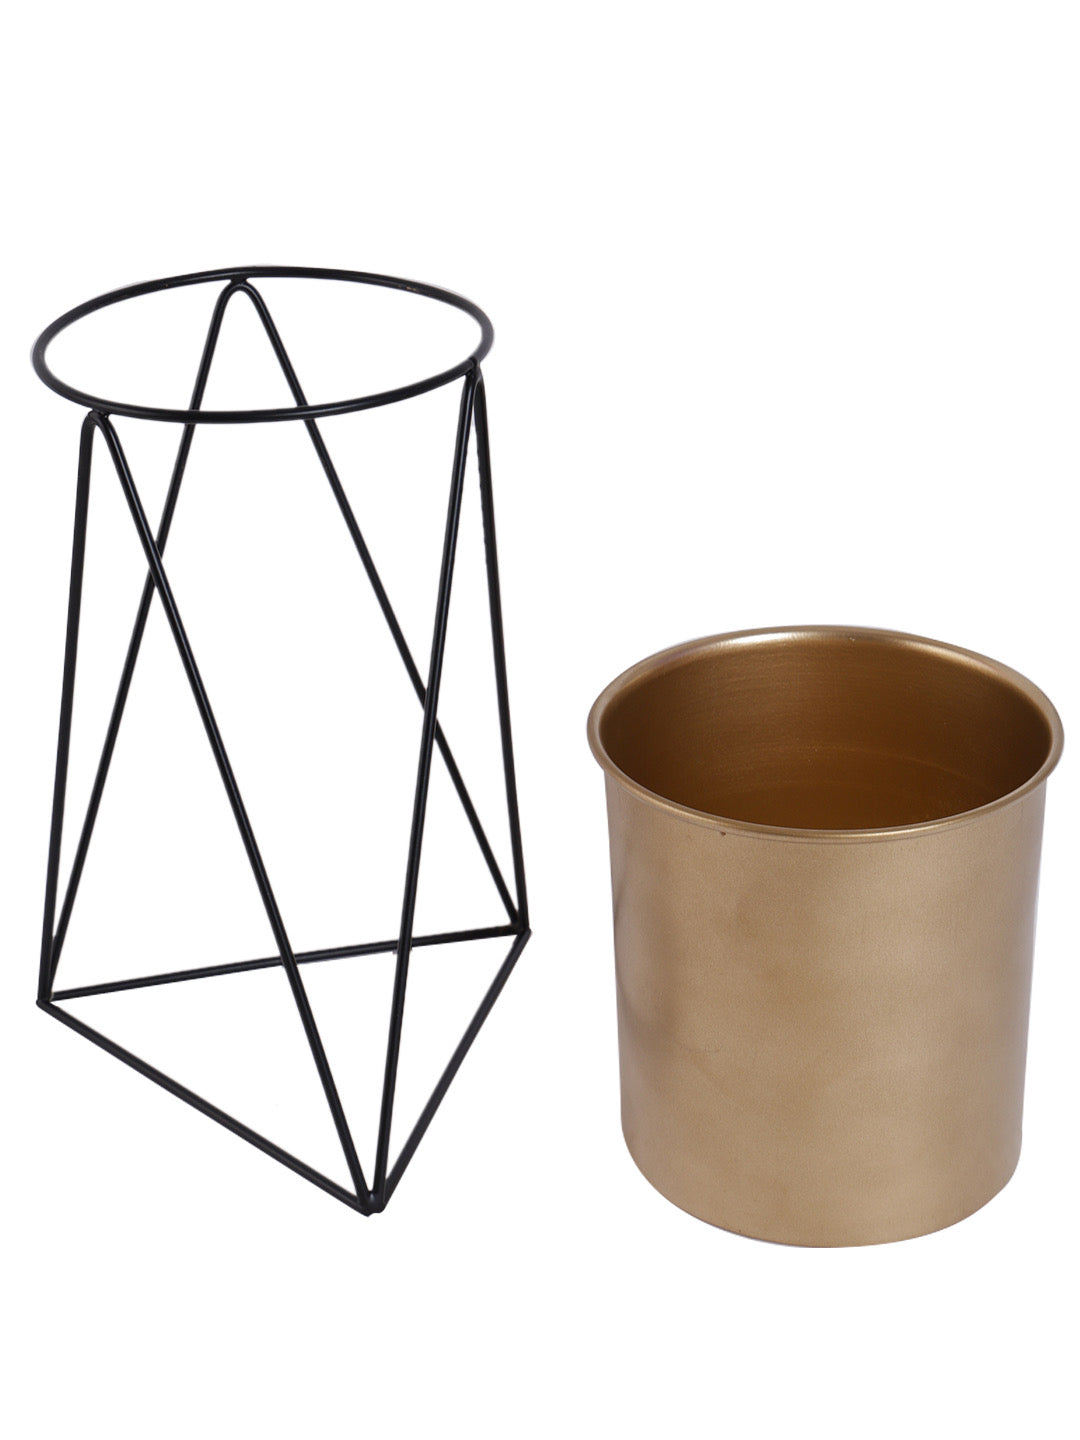 Metal Planter with Triangular Stand - Default Title (CHM2102)